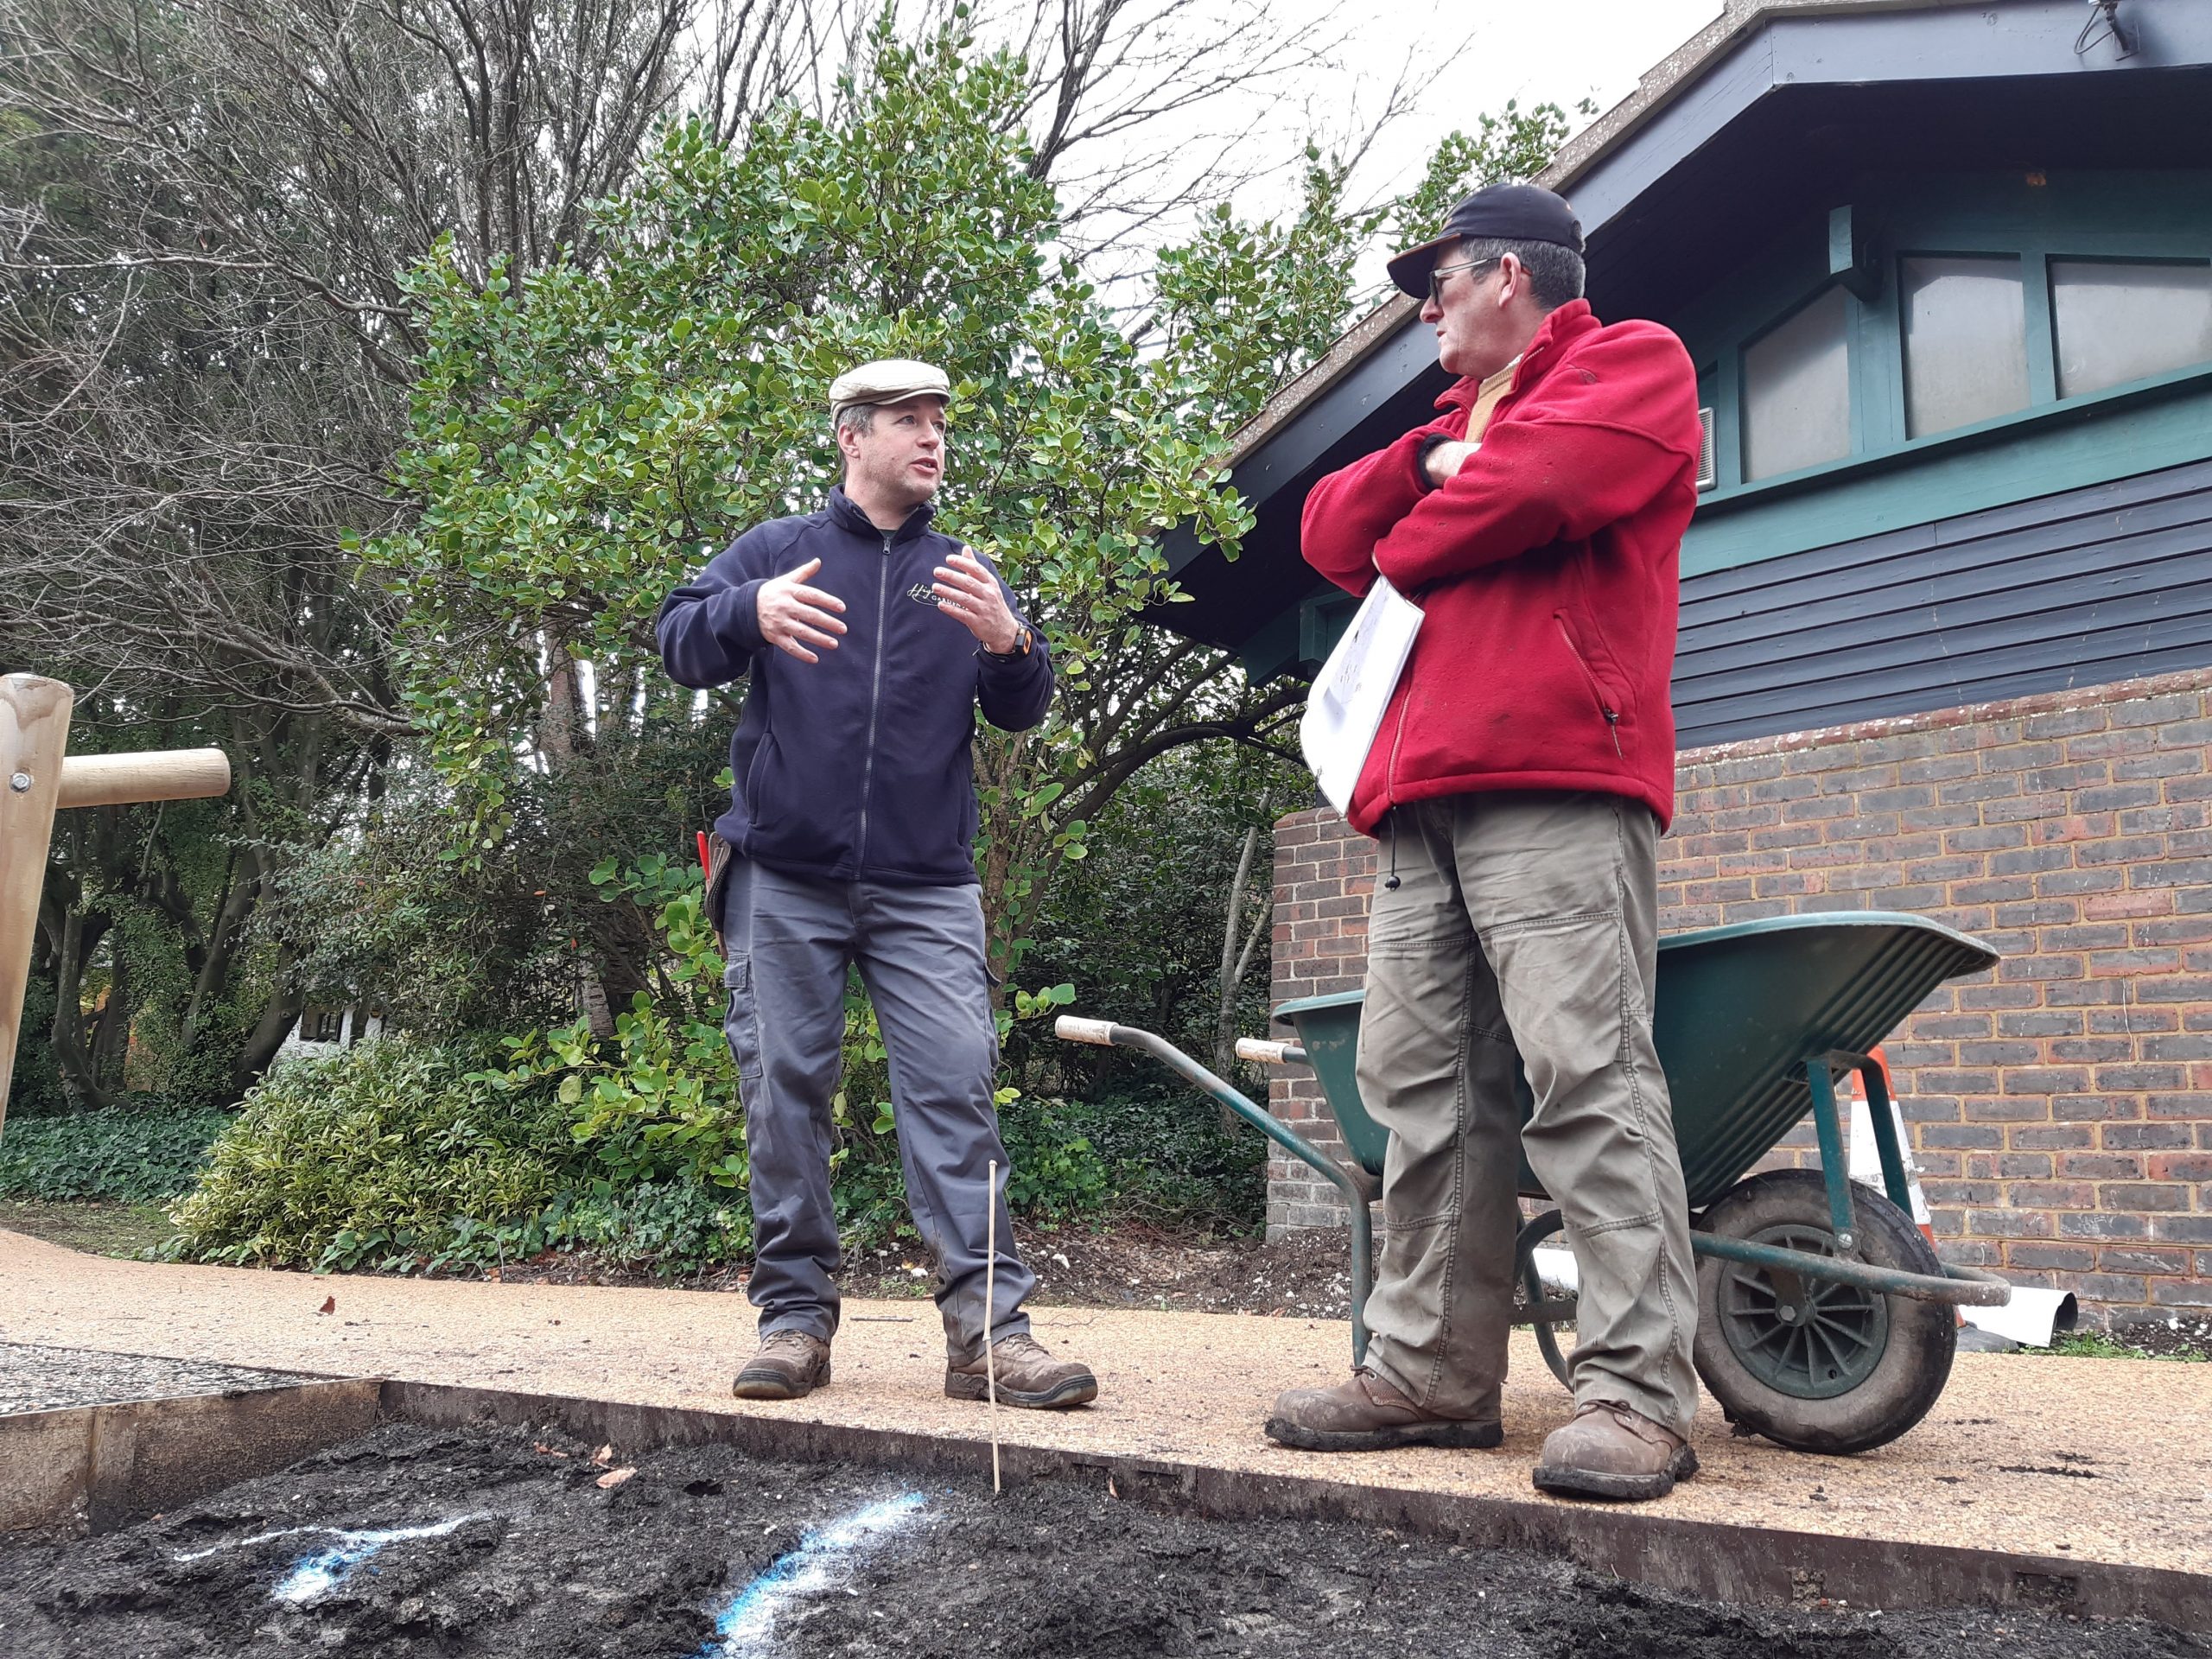 Gardener Toby & Paul from Sussex Prairie Gardens. Photo by Worthing Borough Council